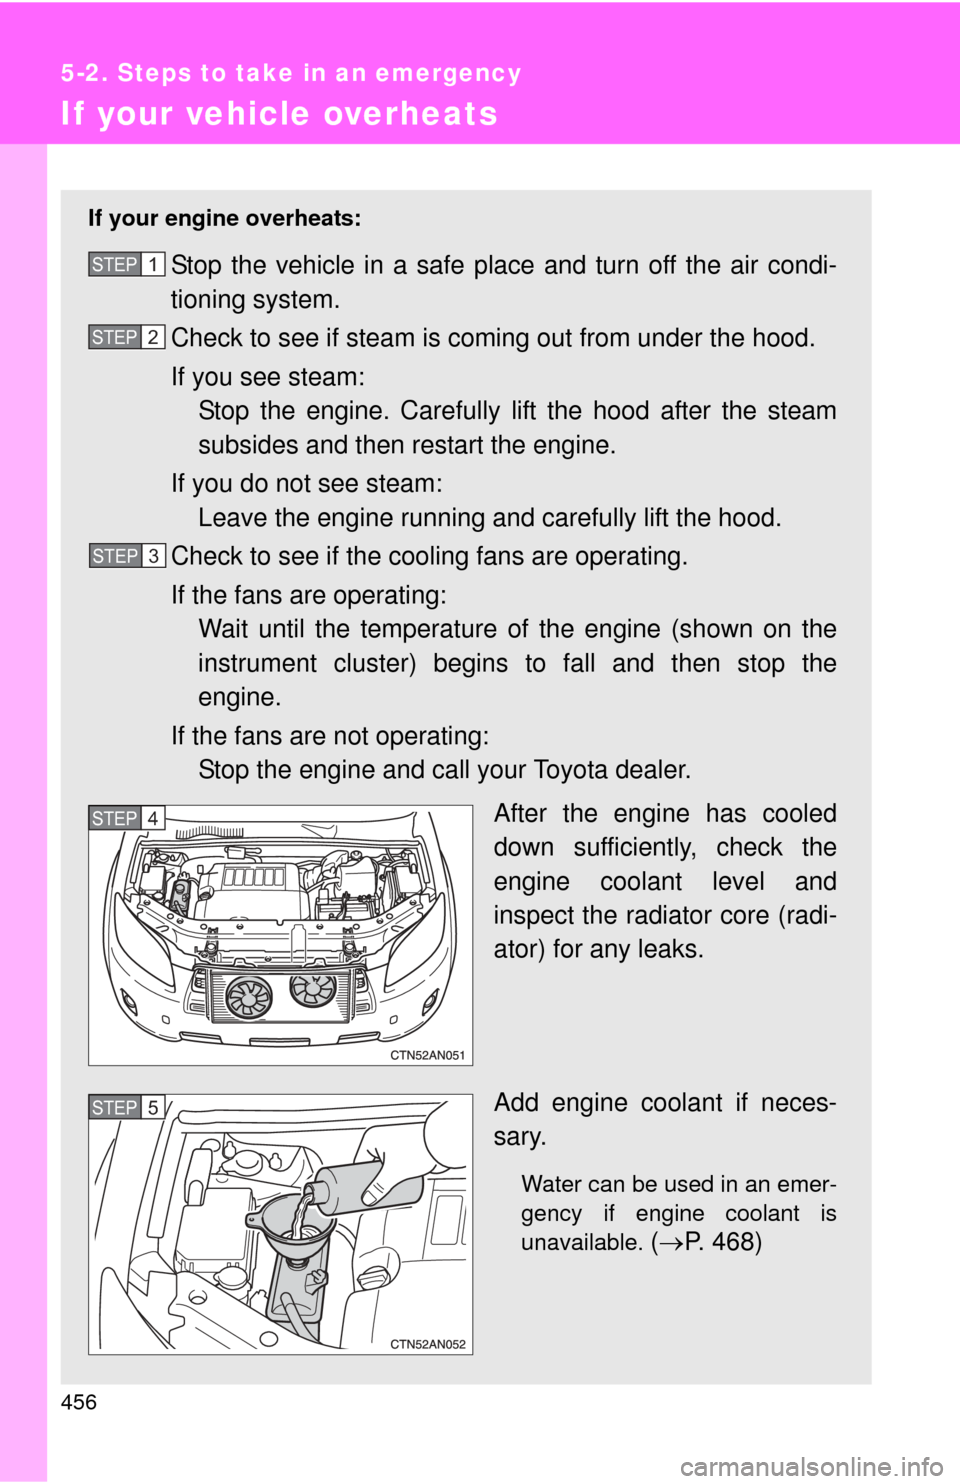 TOYOTA RAV4 2010 XA30 / 3.G Owners Manual 456
5-2. Steps to take in an emergency
If your vehicle overheats
If your engine overheats:
Stop the vehicle in a safe place and turn off the air condi-
tioning system.
Check to see if steam is coming 